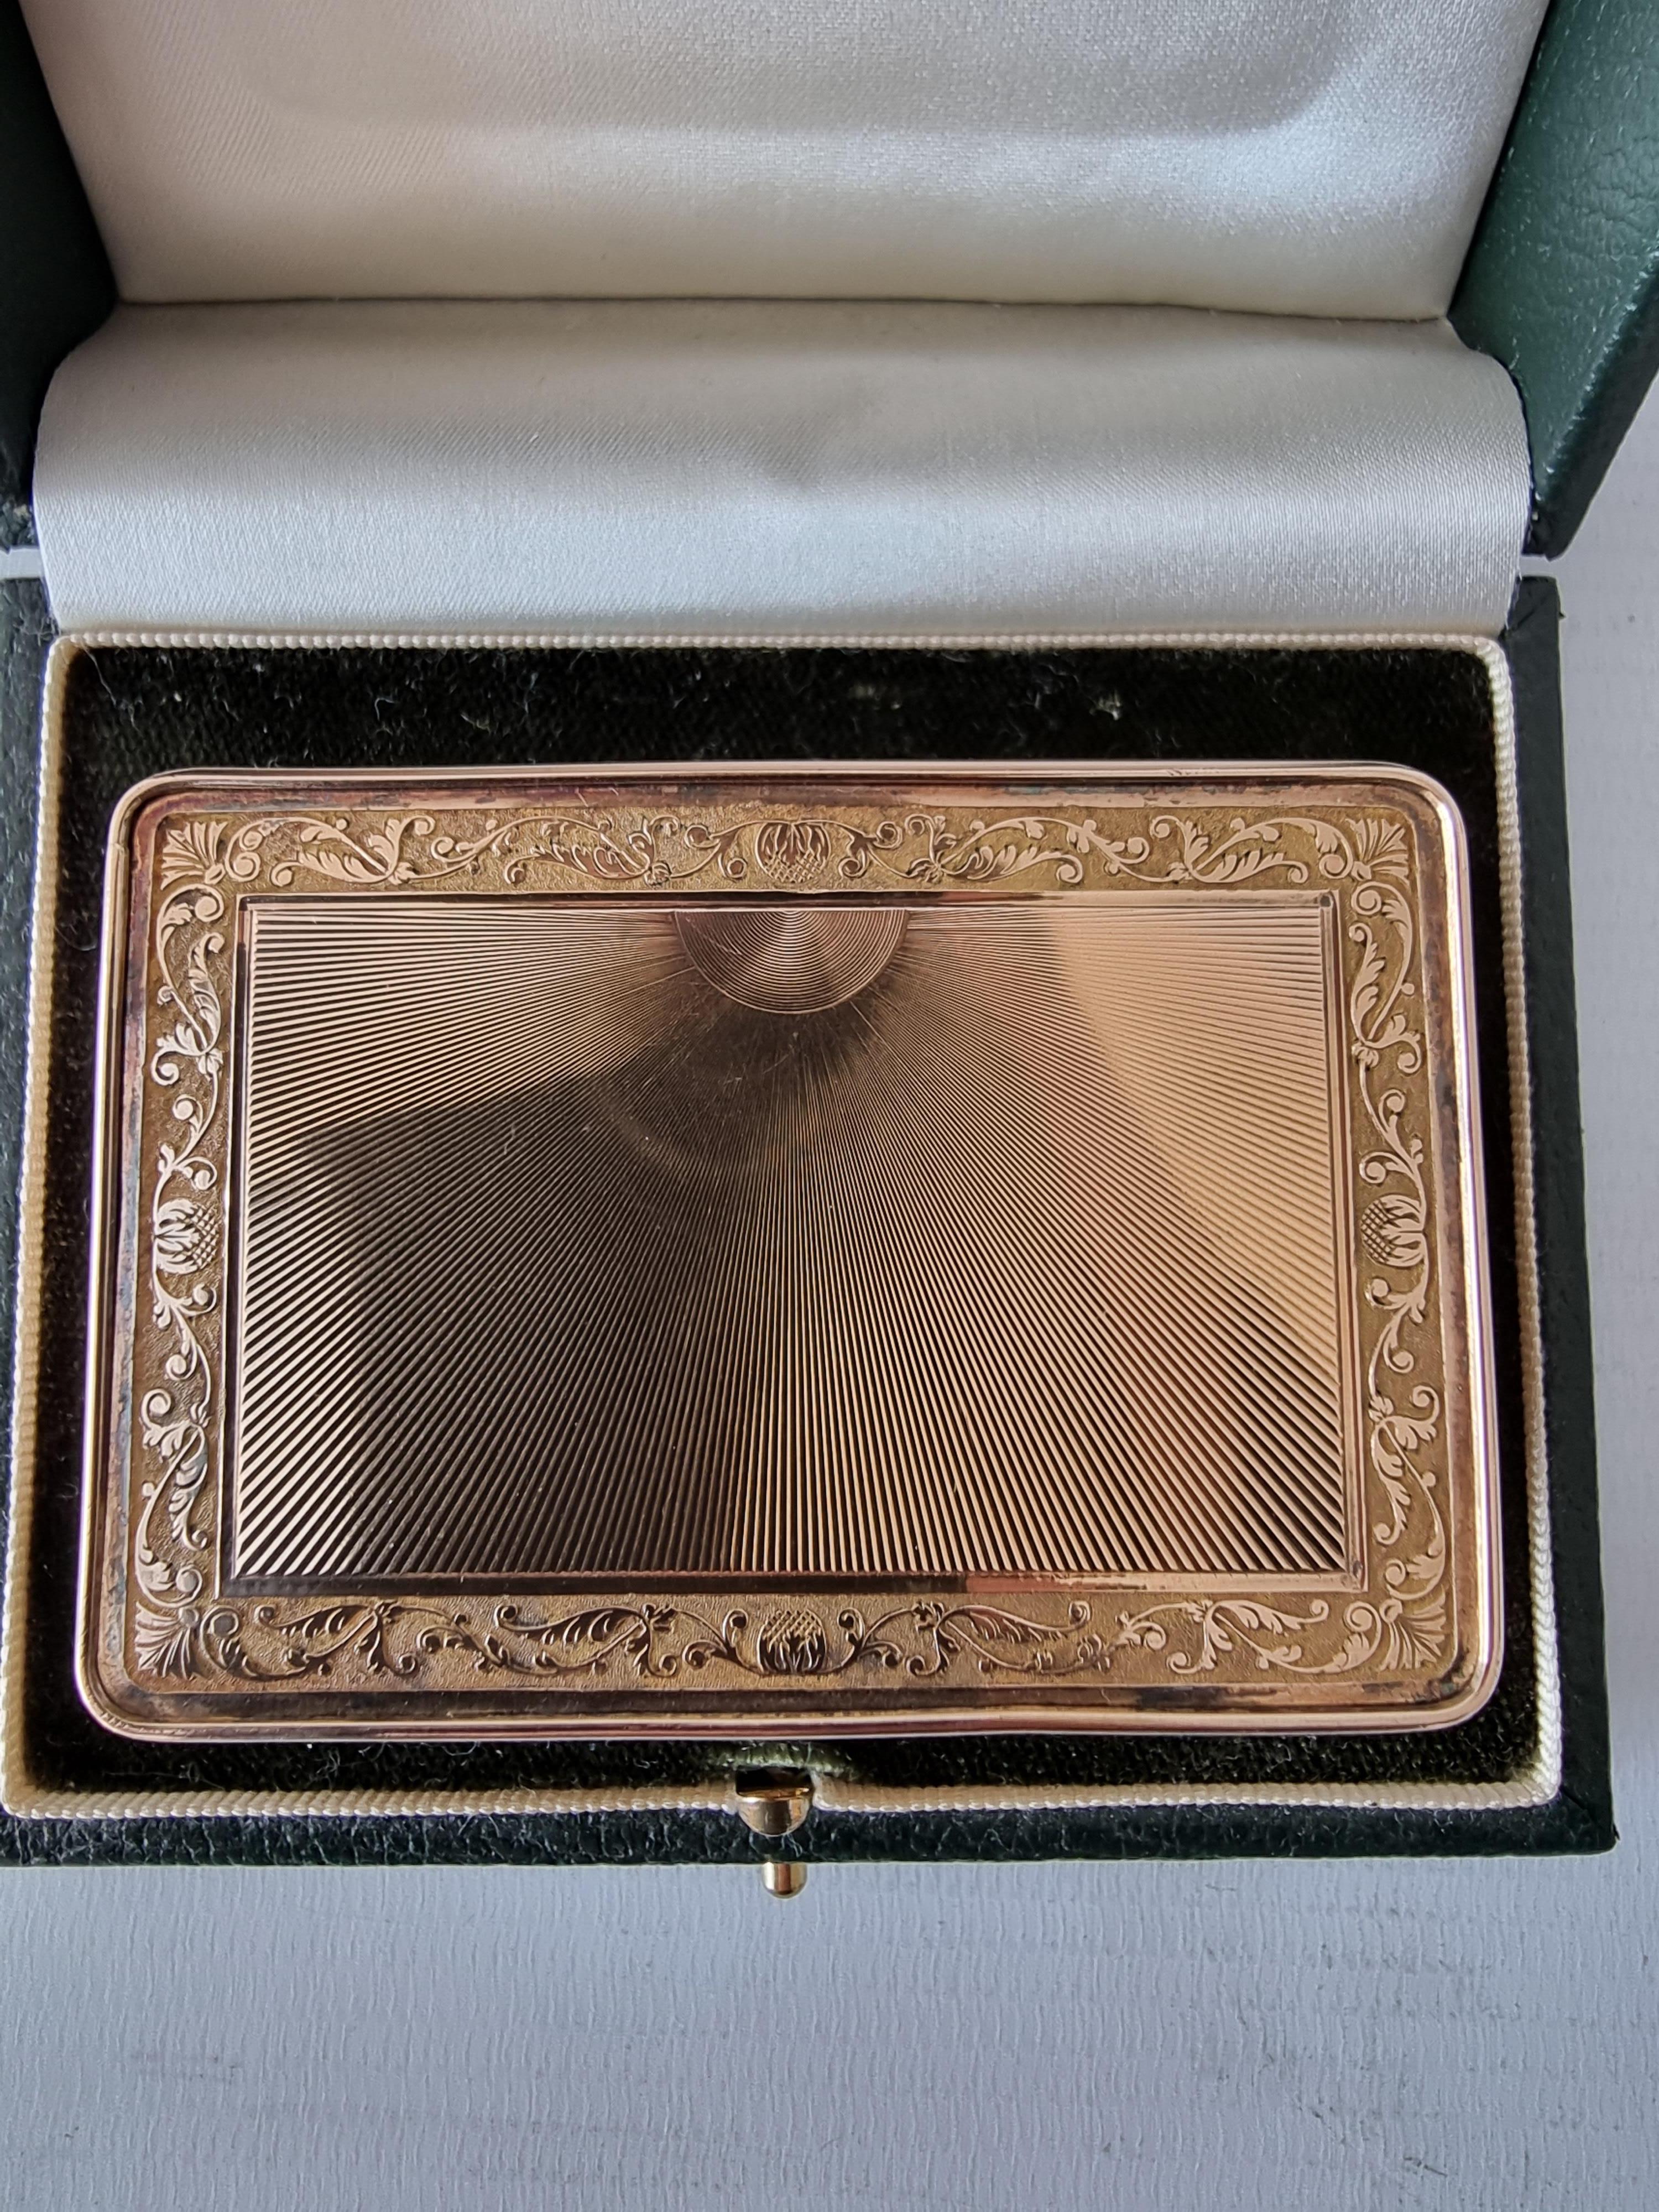 A very early 19th century and fine engine turned silver gilt musical snuffbox. The case stamped F.M. and with early 19th century Swiss export marks and European import marks. Comb bar stamped C.Z bedplate C6. Serial number 147. The cylinder movement